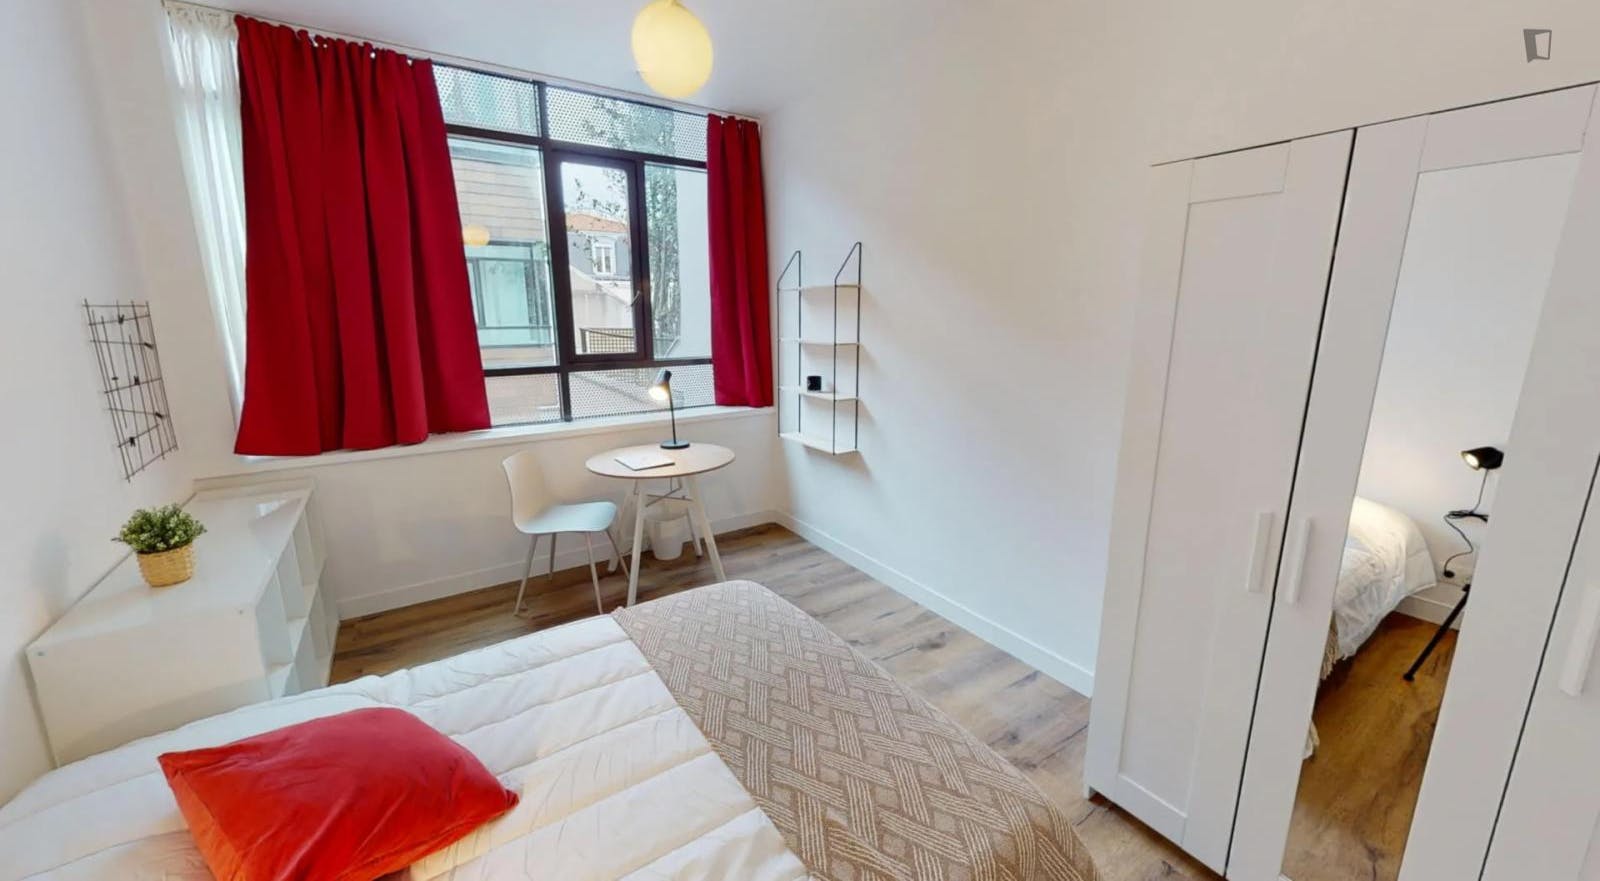 Cute double ensuite in a 12-bedroom apartment not far from Sports Area Jean-Pierre Rives